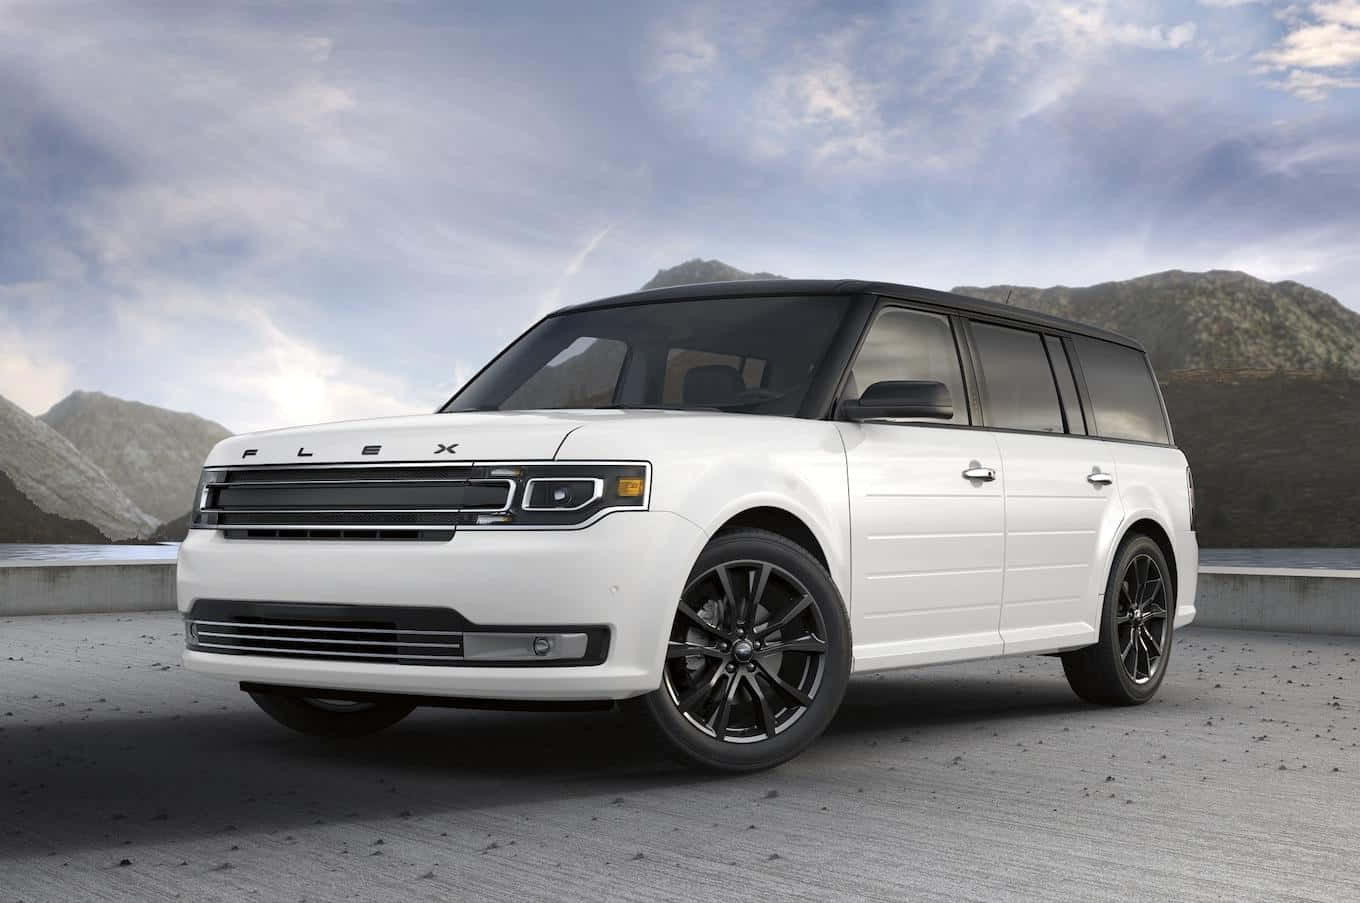 Caption: Ford Flex on the Road Wallpaper